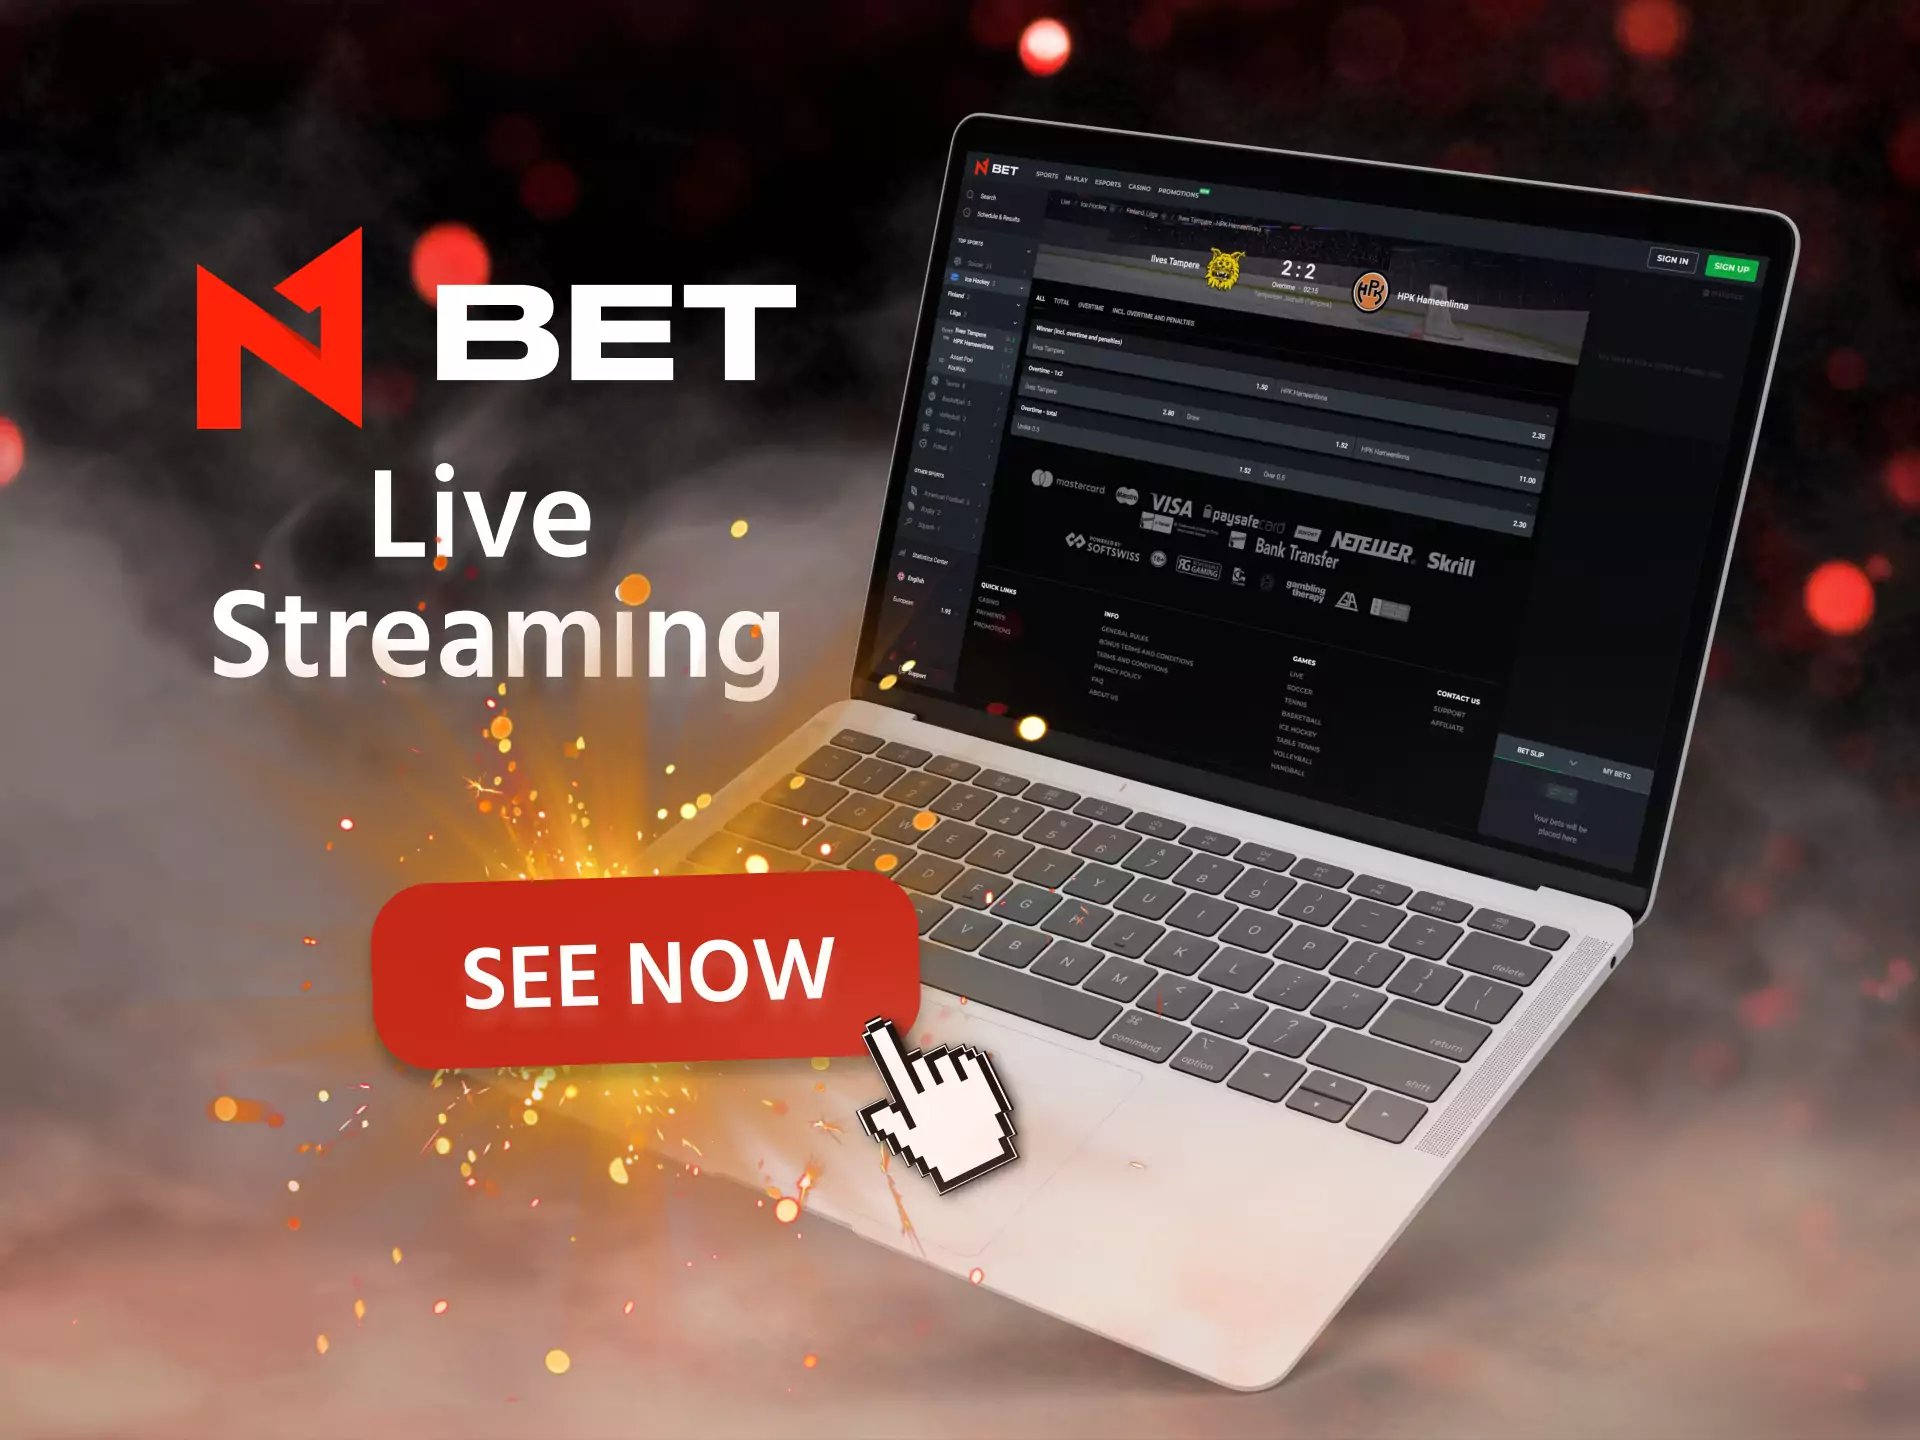 Watch N1Bet streaming and place bets.